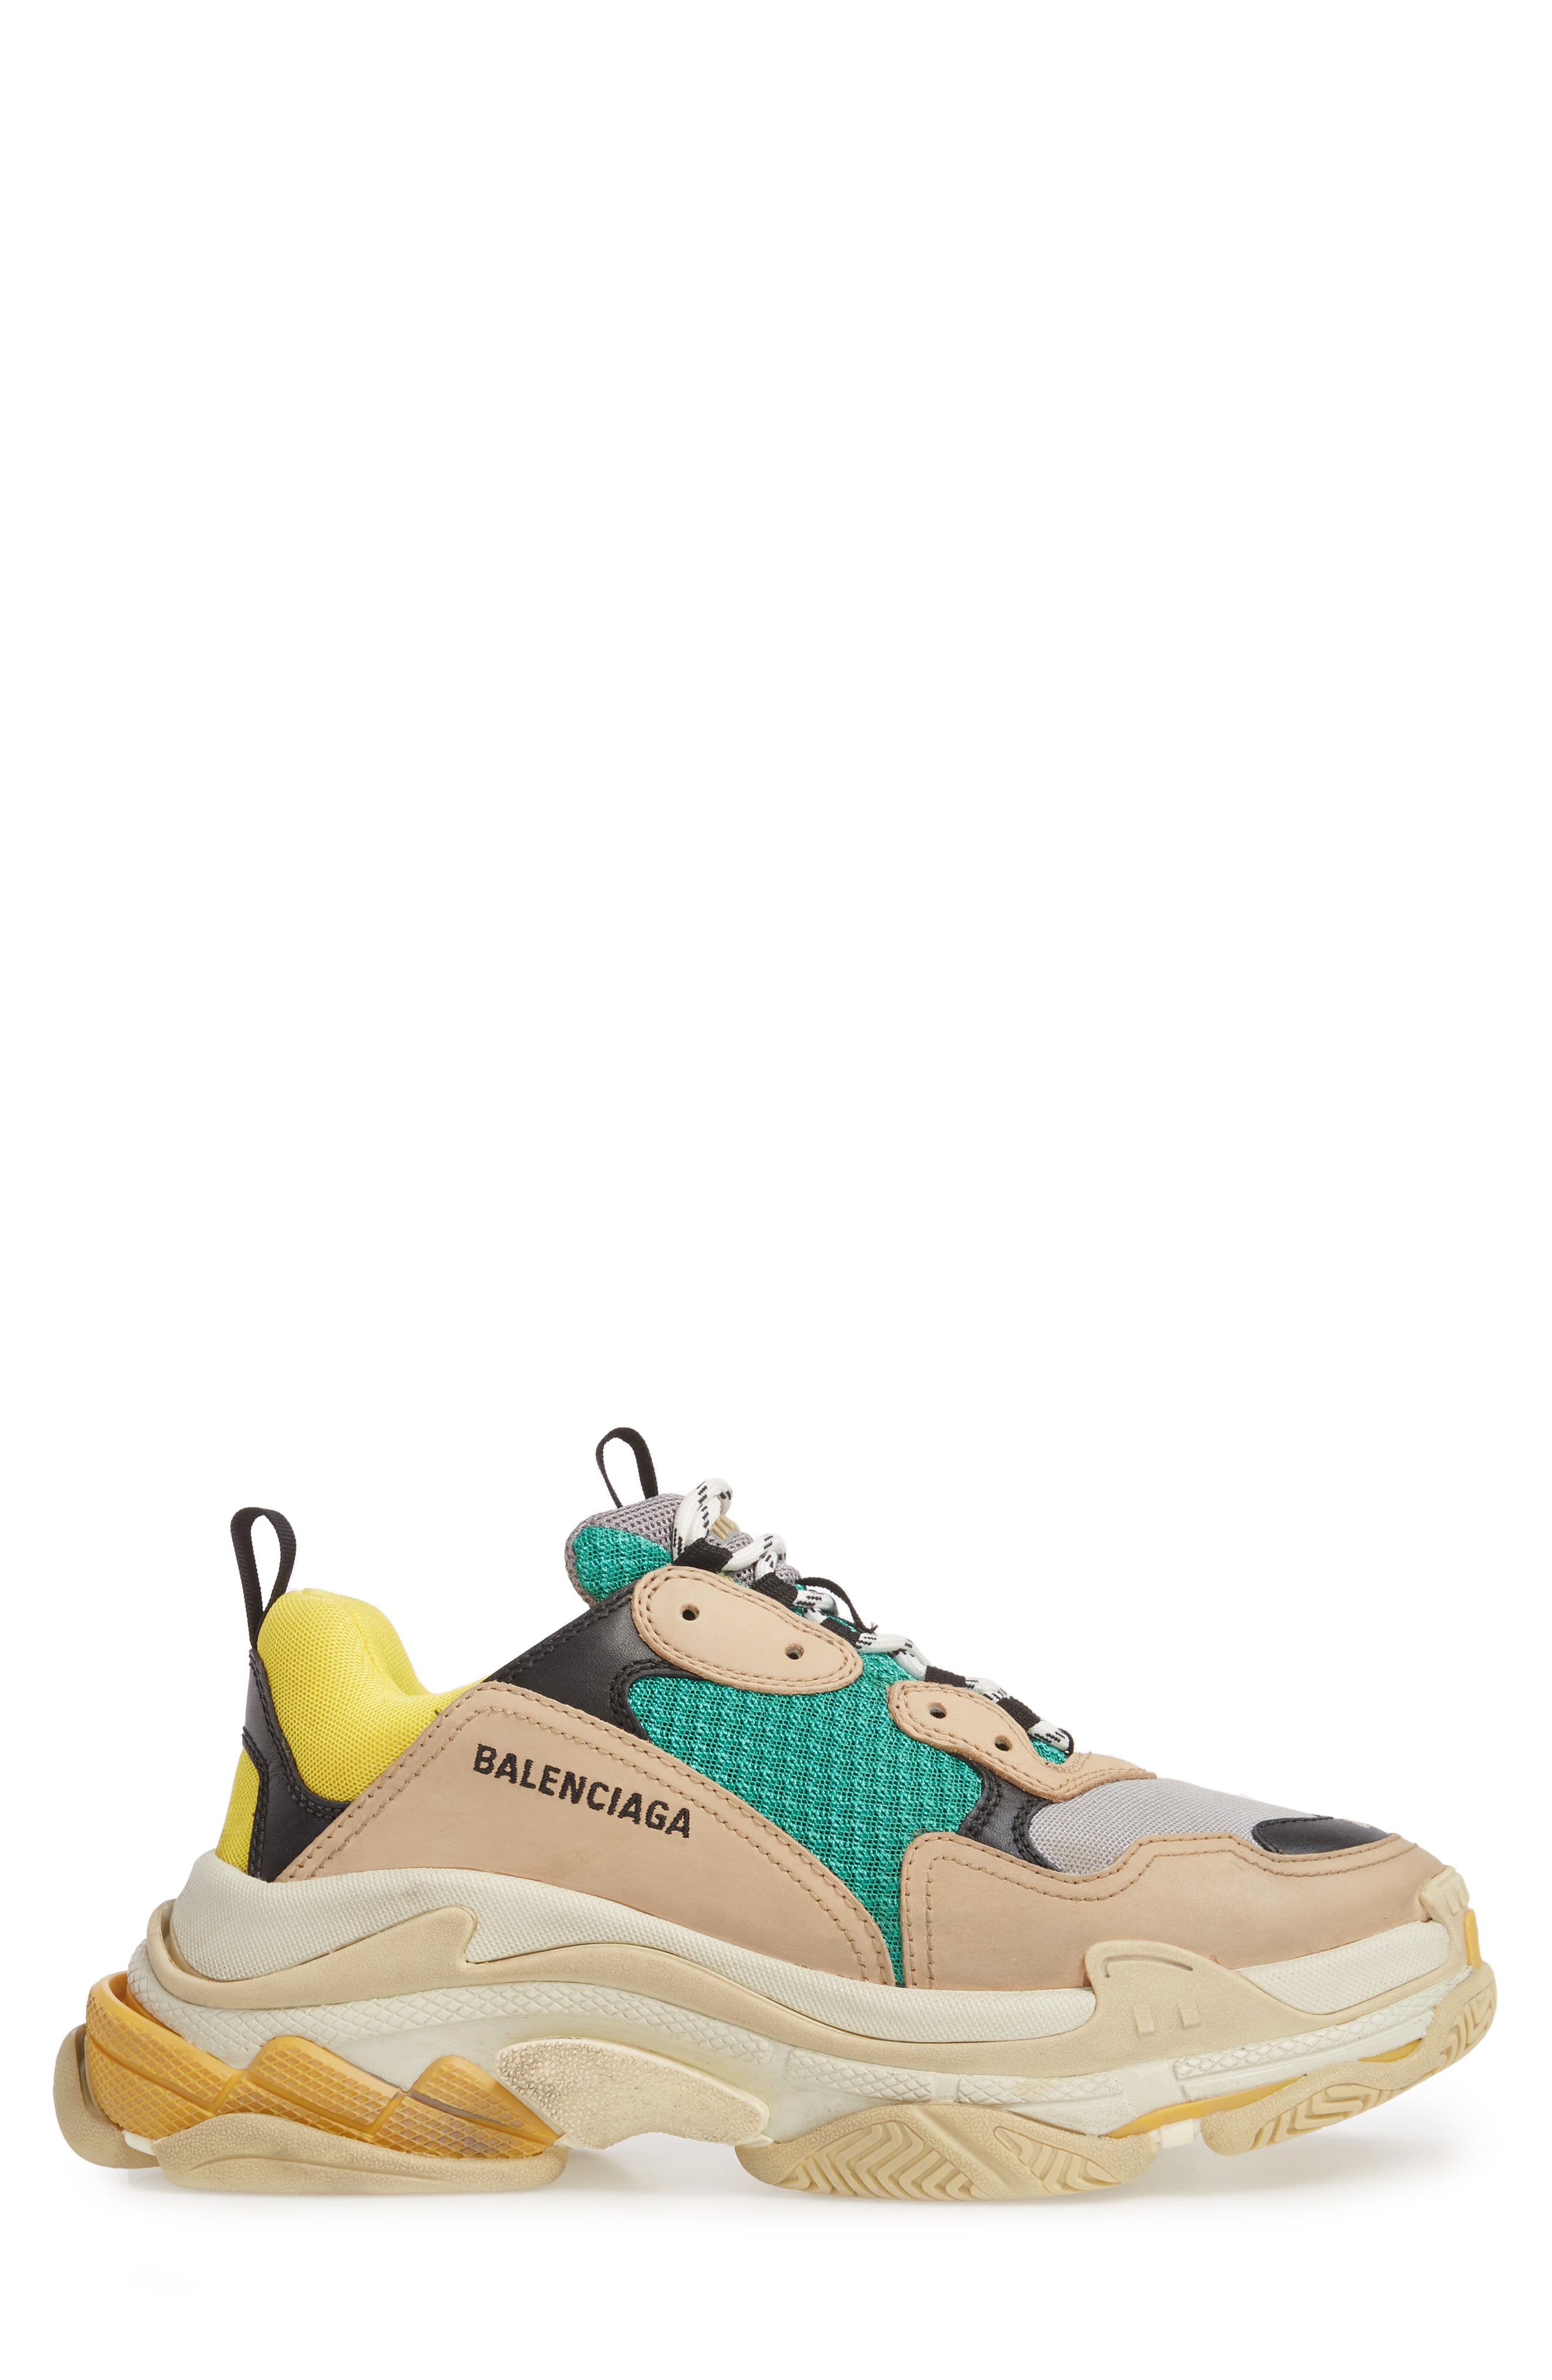 Buy cheap Balenciaga Triple S Trainers Neon Green at the best price